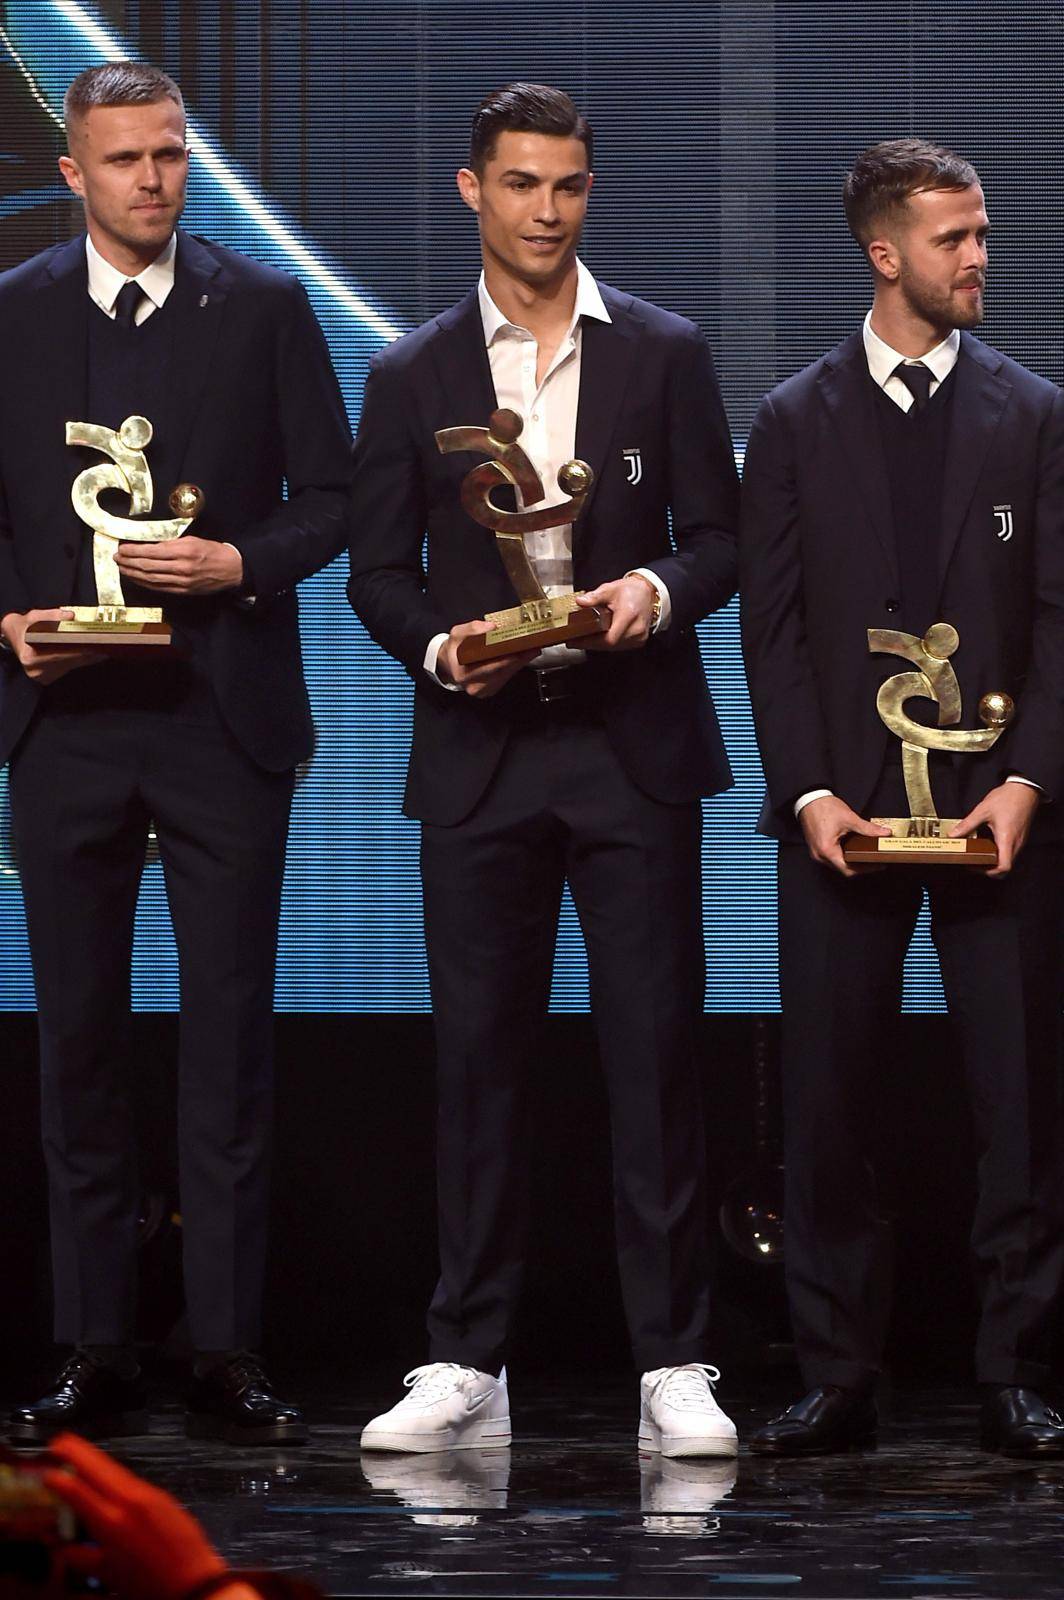 Milan, Award ceremony for the best football player of "Serie A" 2018/19 season